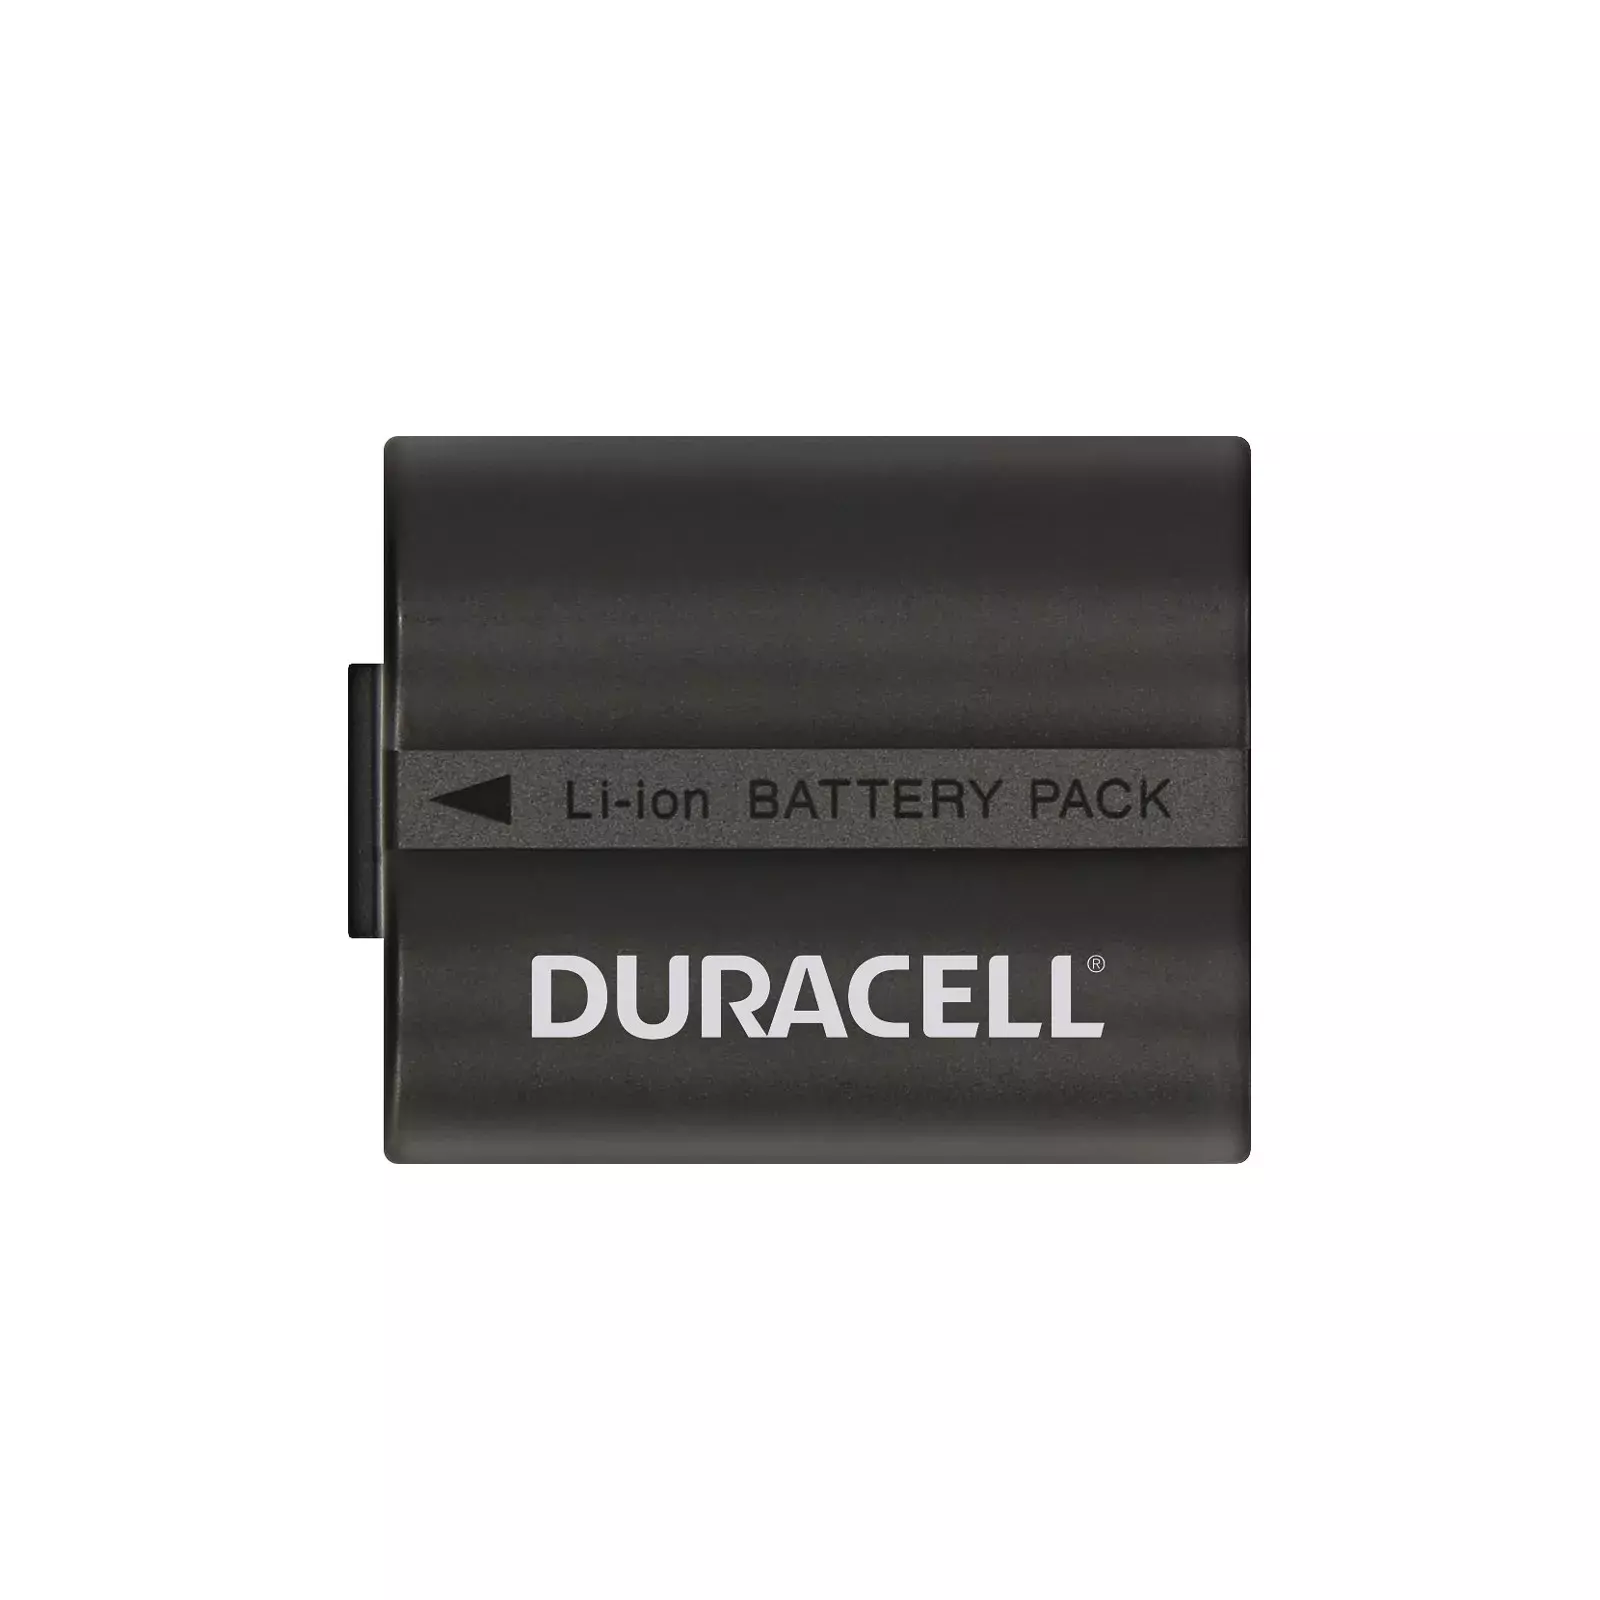 Duracell DR9668 Photo 4